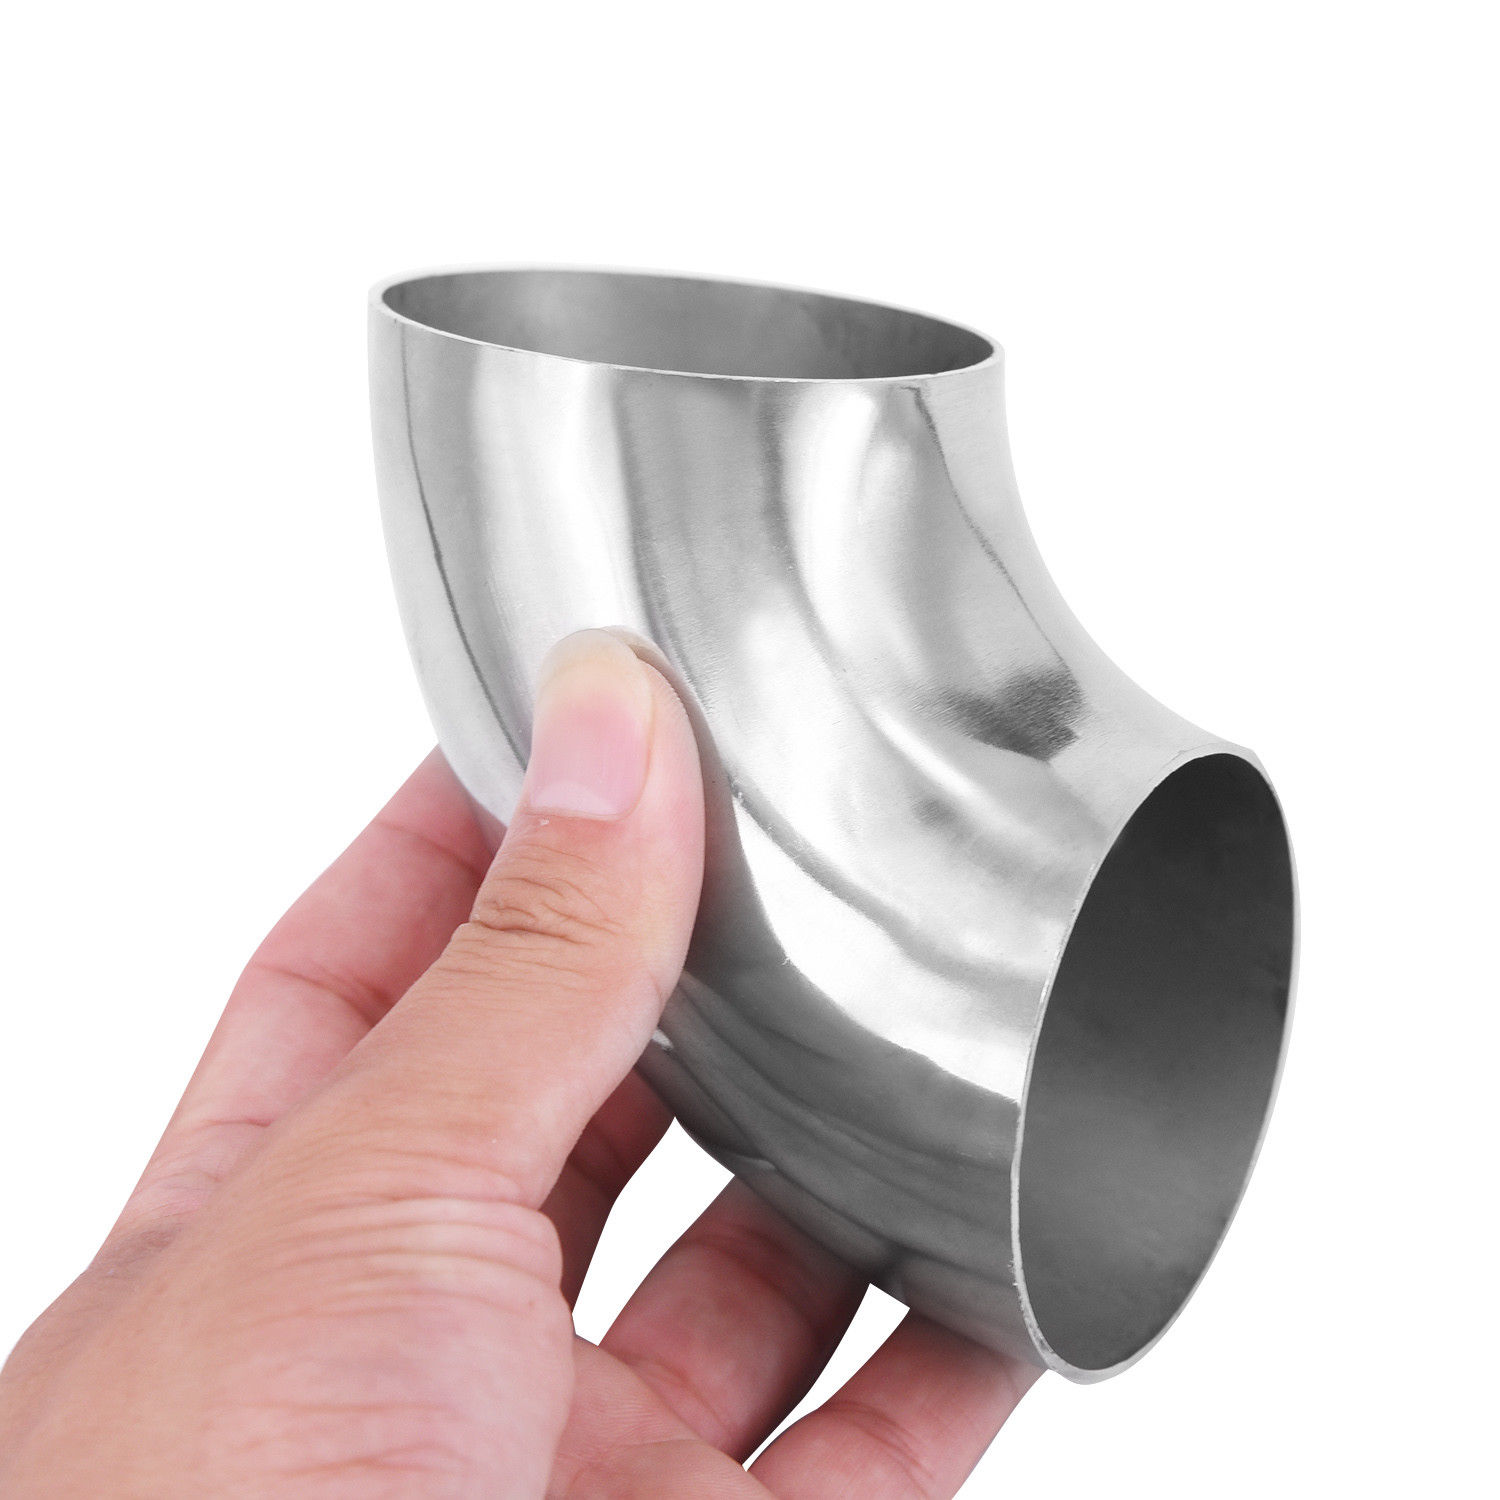 3/"//76mm OD Stainless-Steel Car Exhaust Weld 90-Degree Bend Elbow Pipe Fitting US